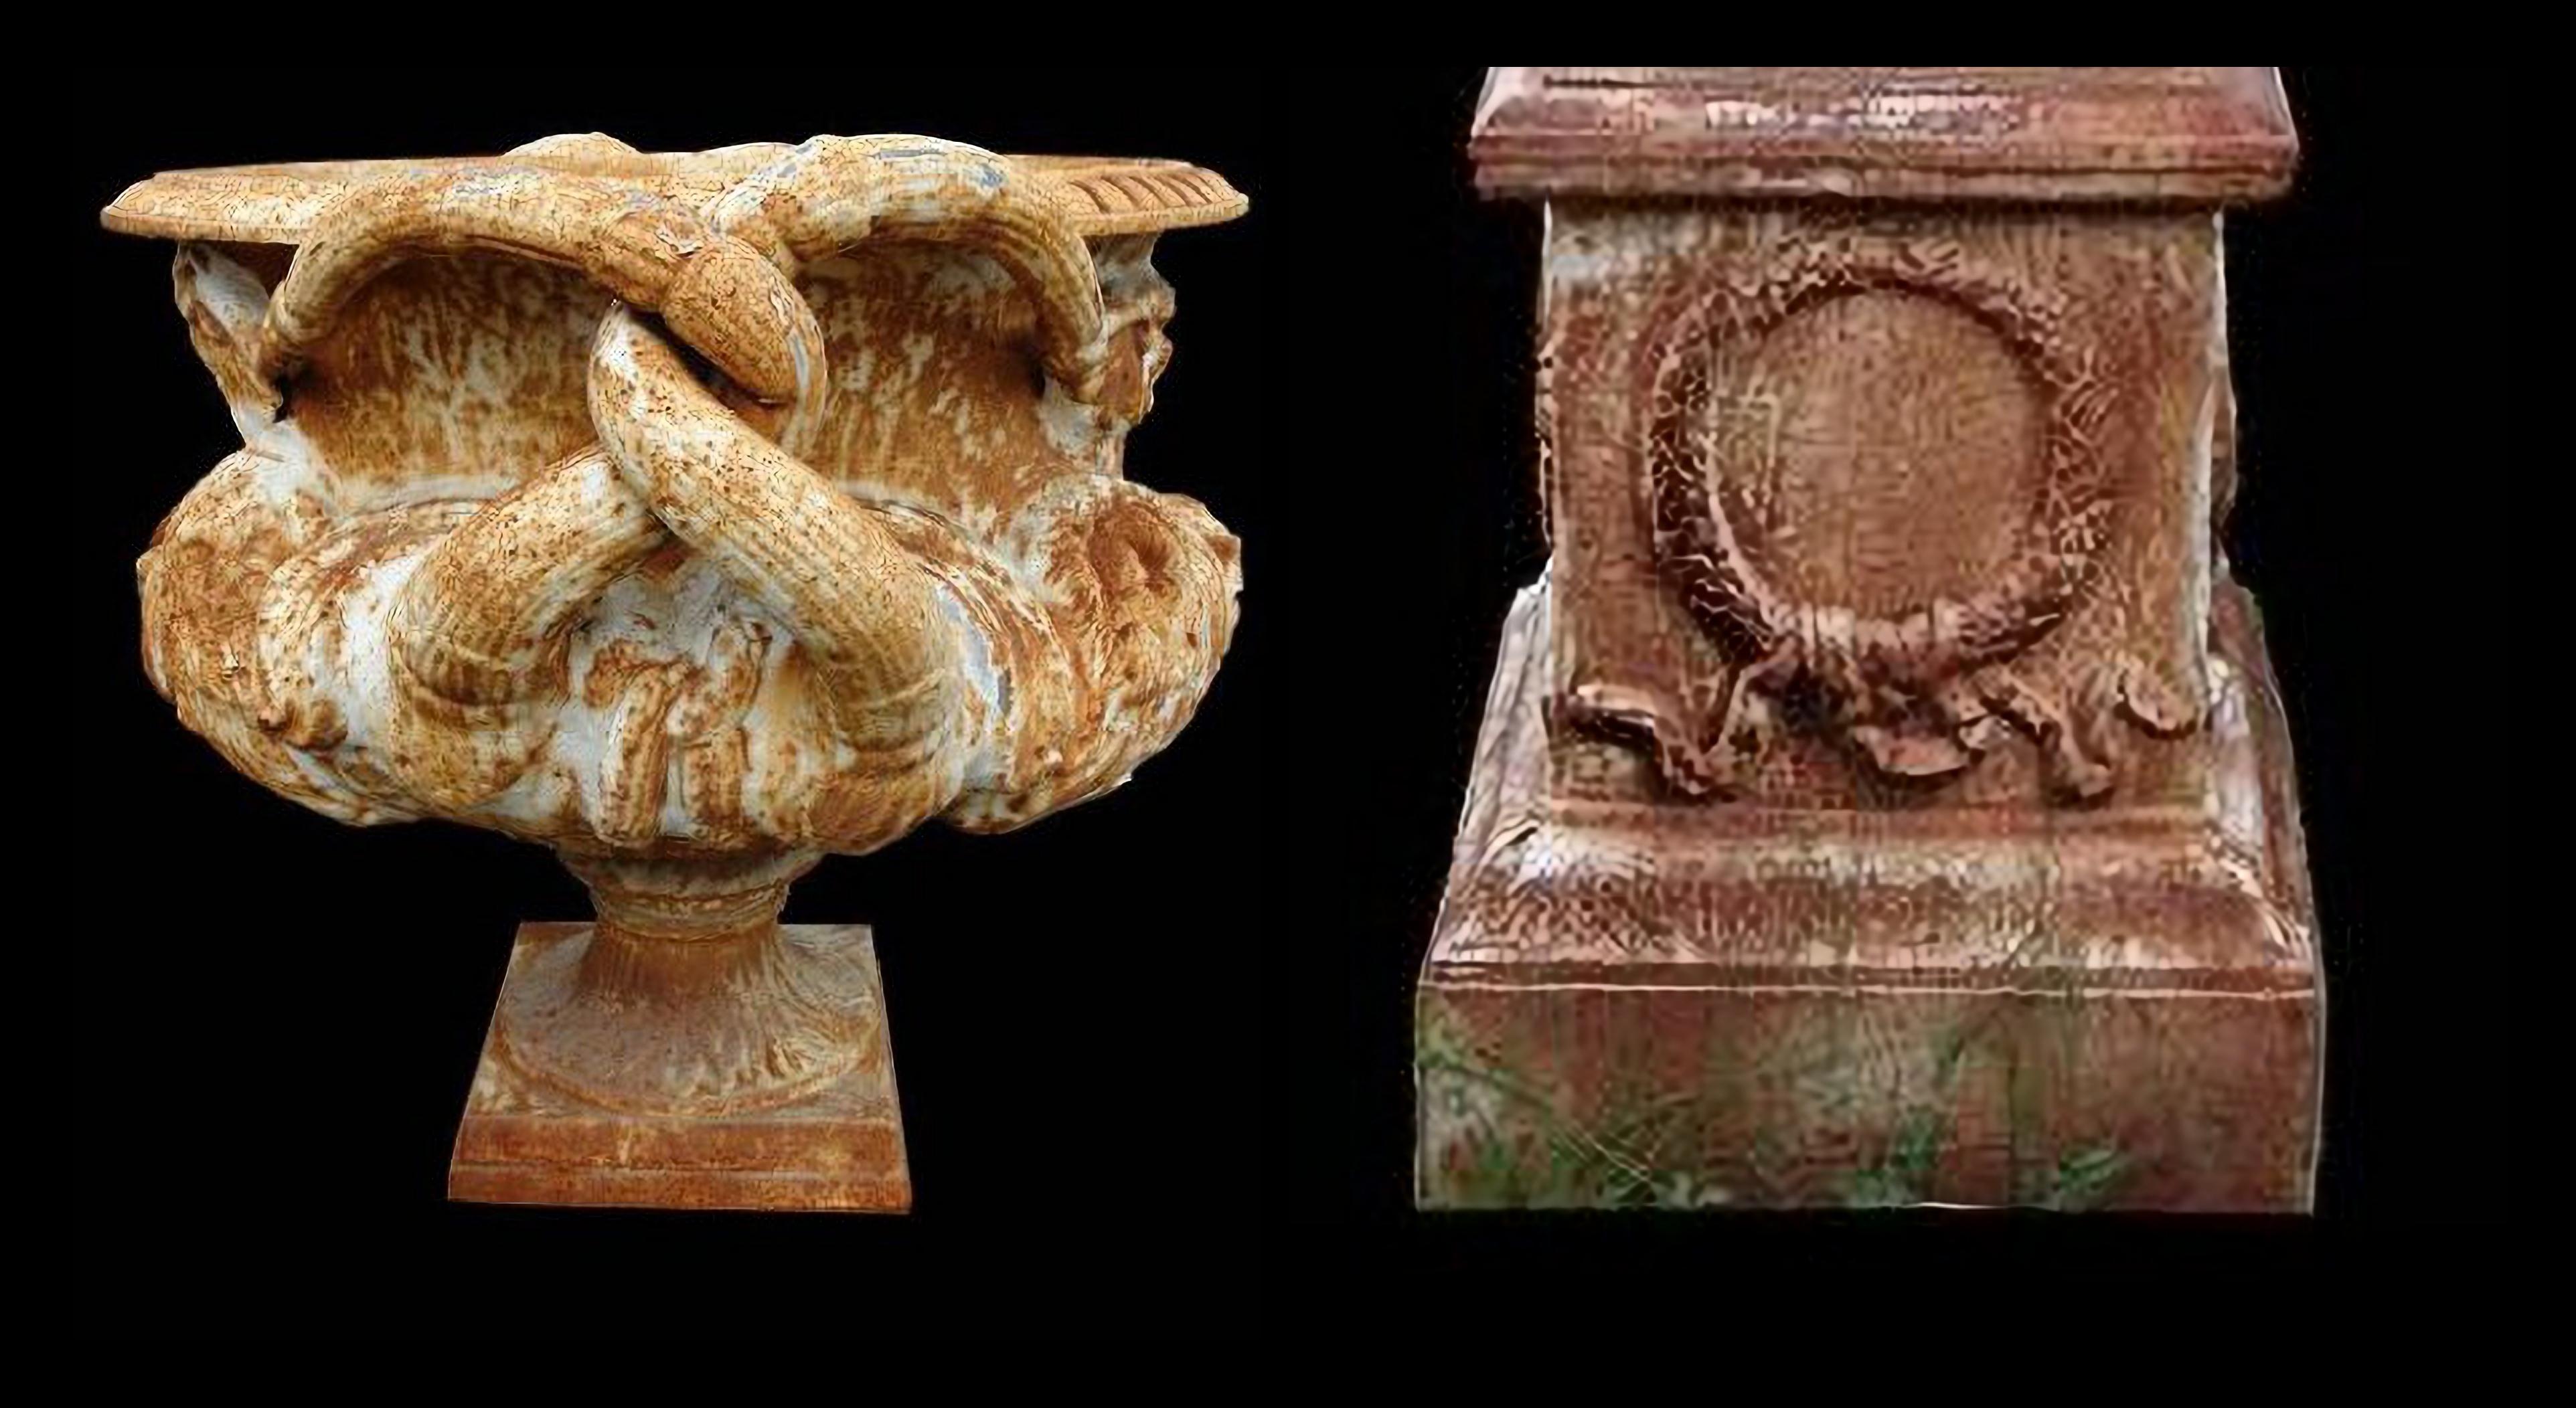 PAIR OF LARGE MEDUSA VASES Piranesi copy end 19th Century

Pair of Large Ornamental Vases
Italy
base 60x60 diameter 90
Width 80 Height 110
This is one of the famous vases designed by Giovan Battista Piranesi 1720-1778.
You will find it in the book